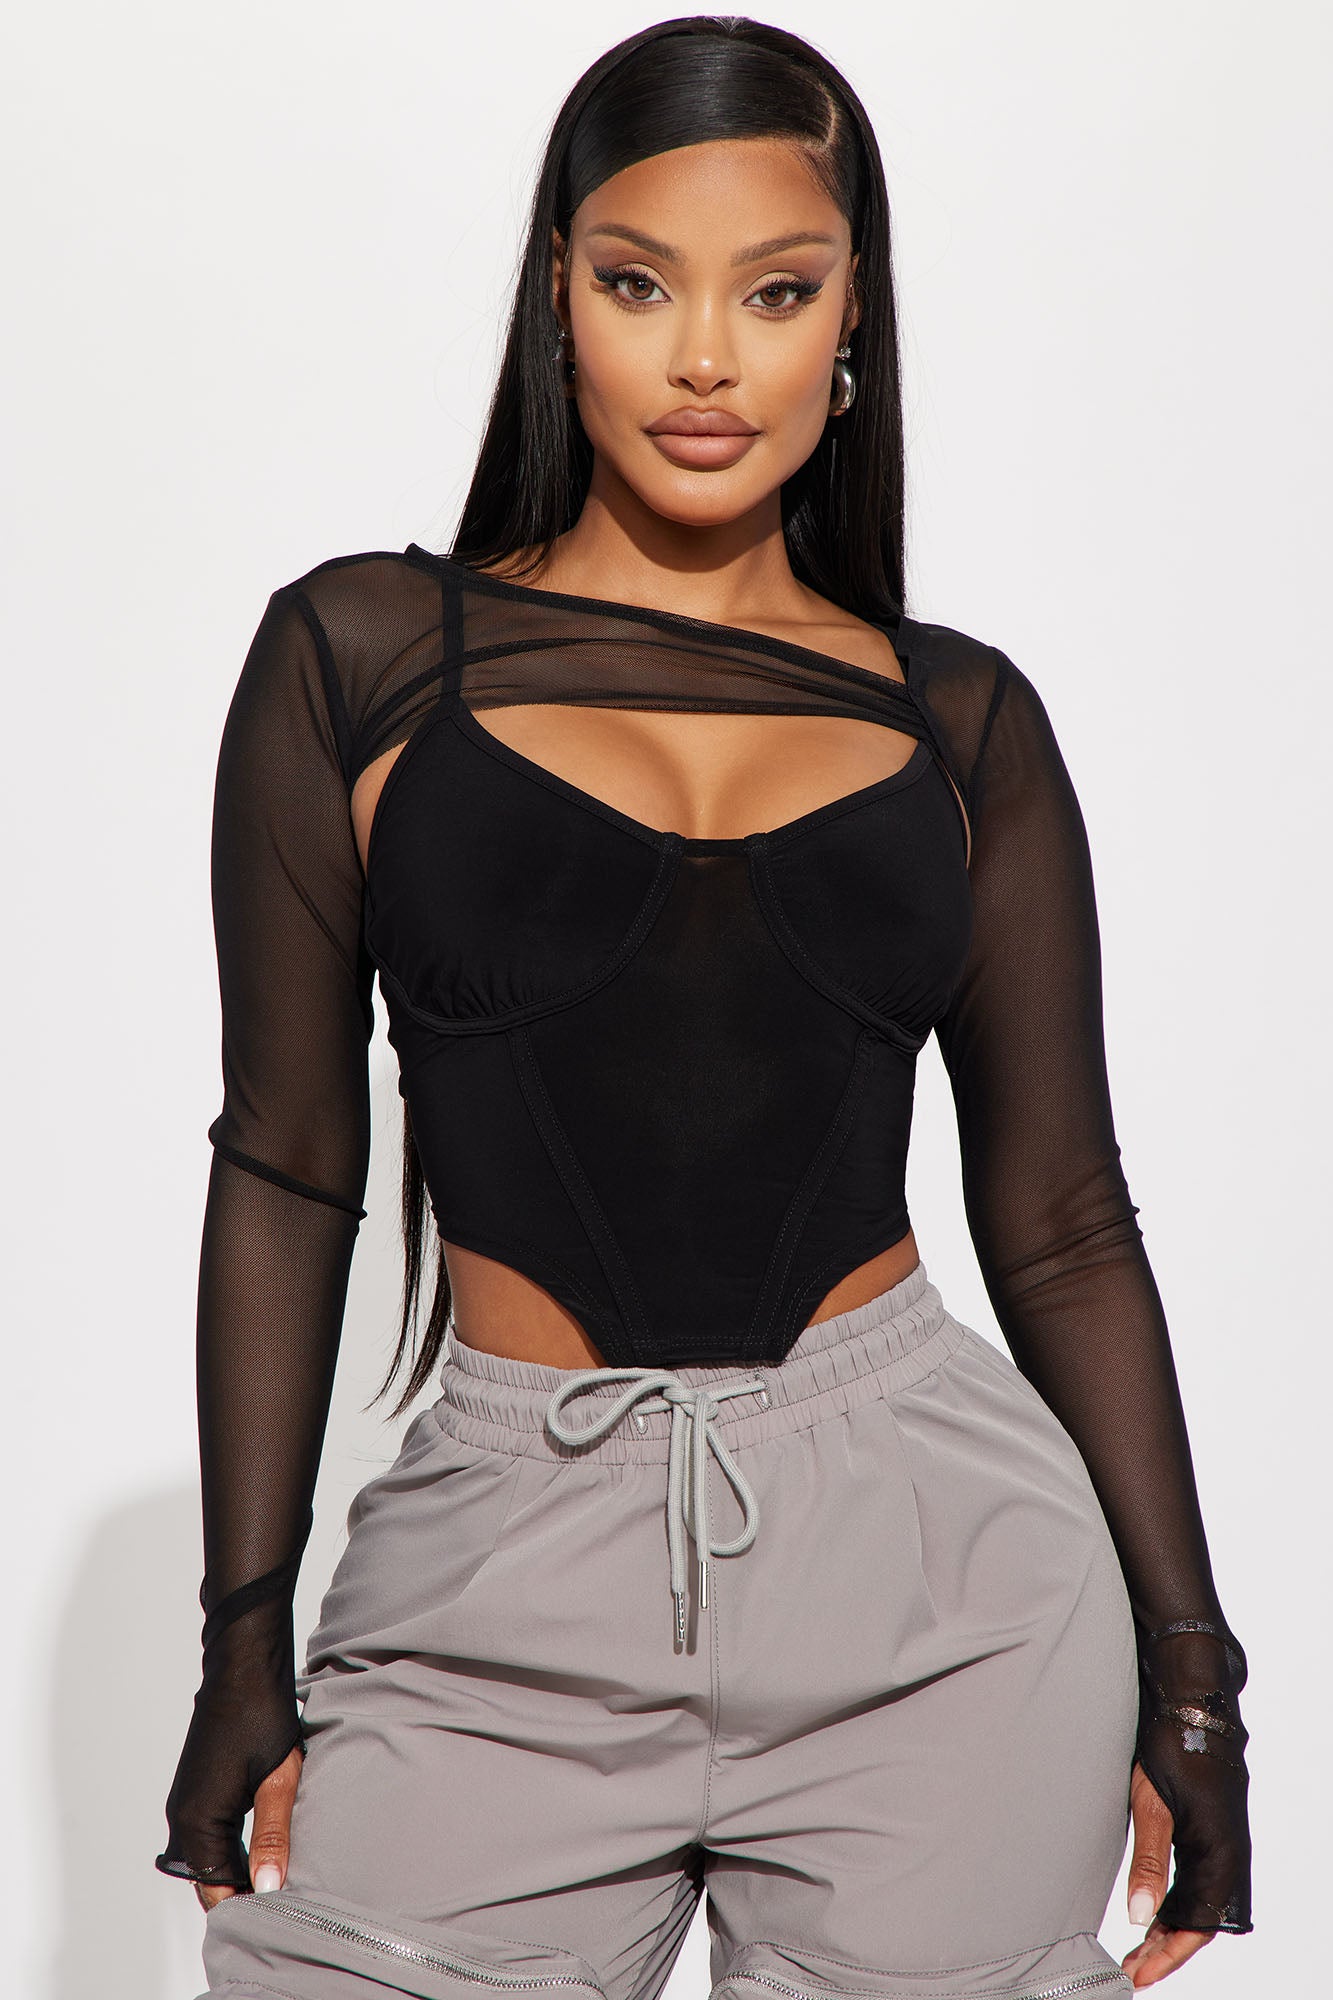 Black Mesh Top - Long Sleeve Mesh Top - Sexy Top - Going Out Top